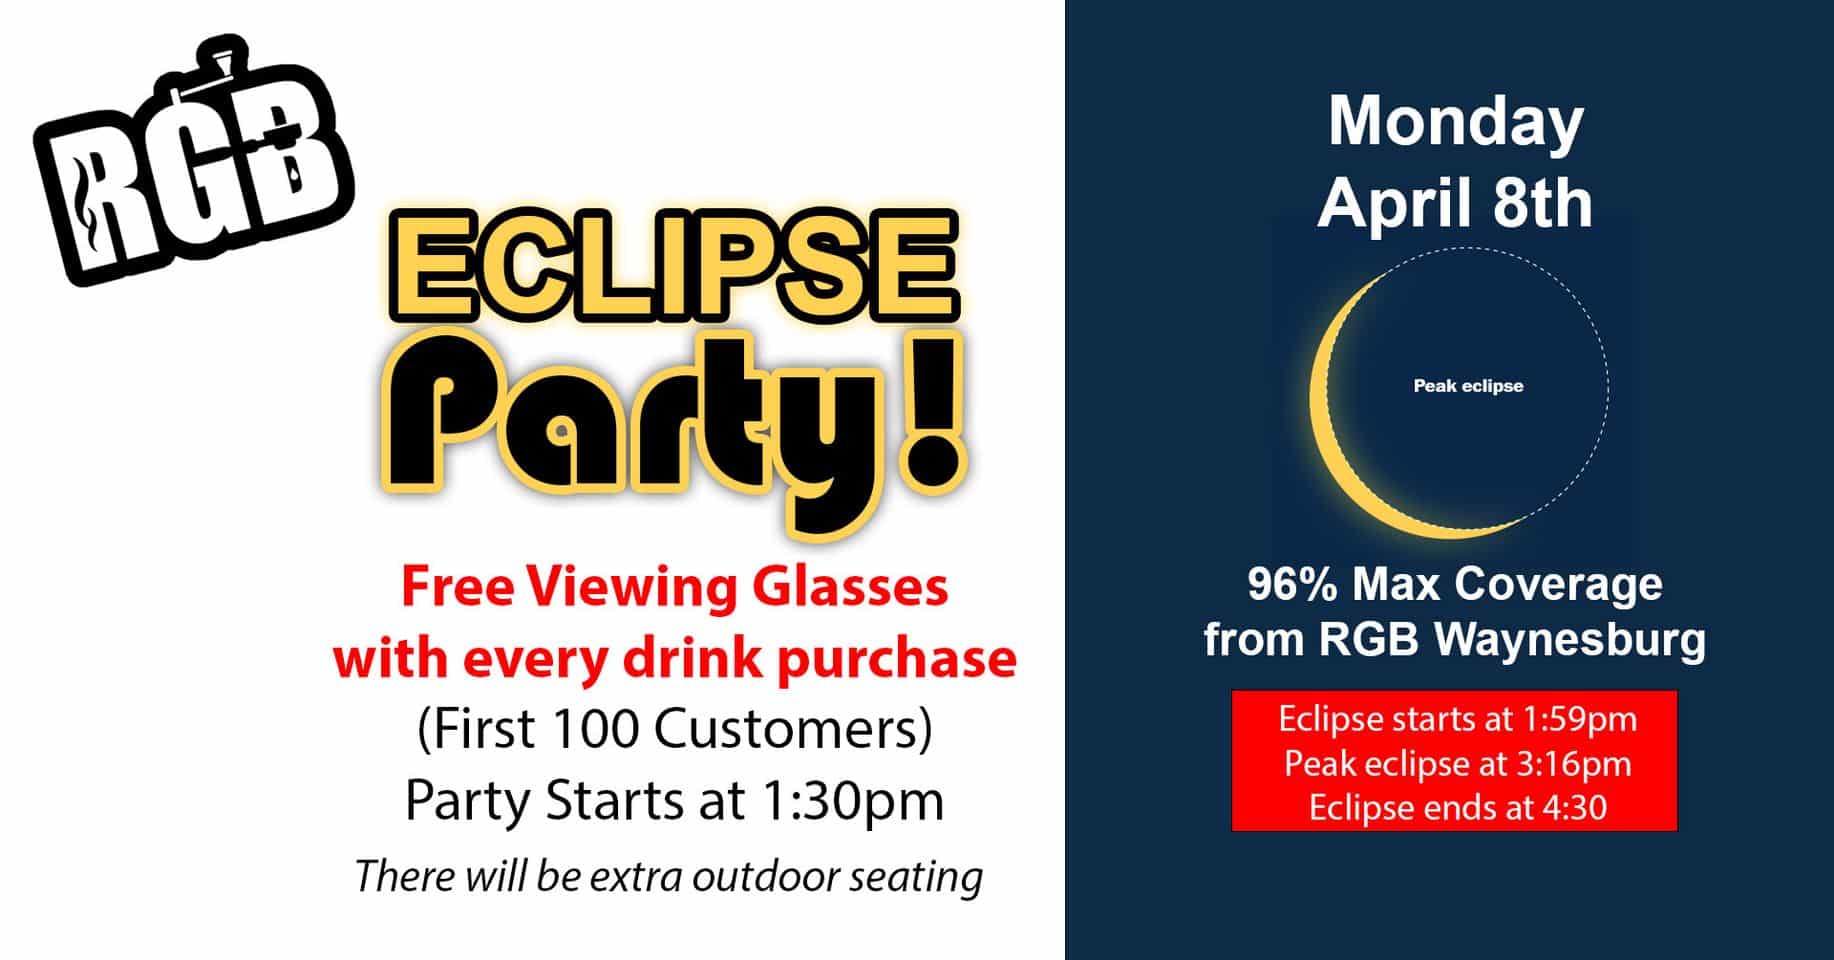 Flyer for RGB Coffee's solar Eclipse Party on Monday, April 8th. Free viewing glasses with every drink purchase for the first 100 customers.